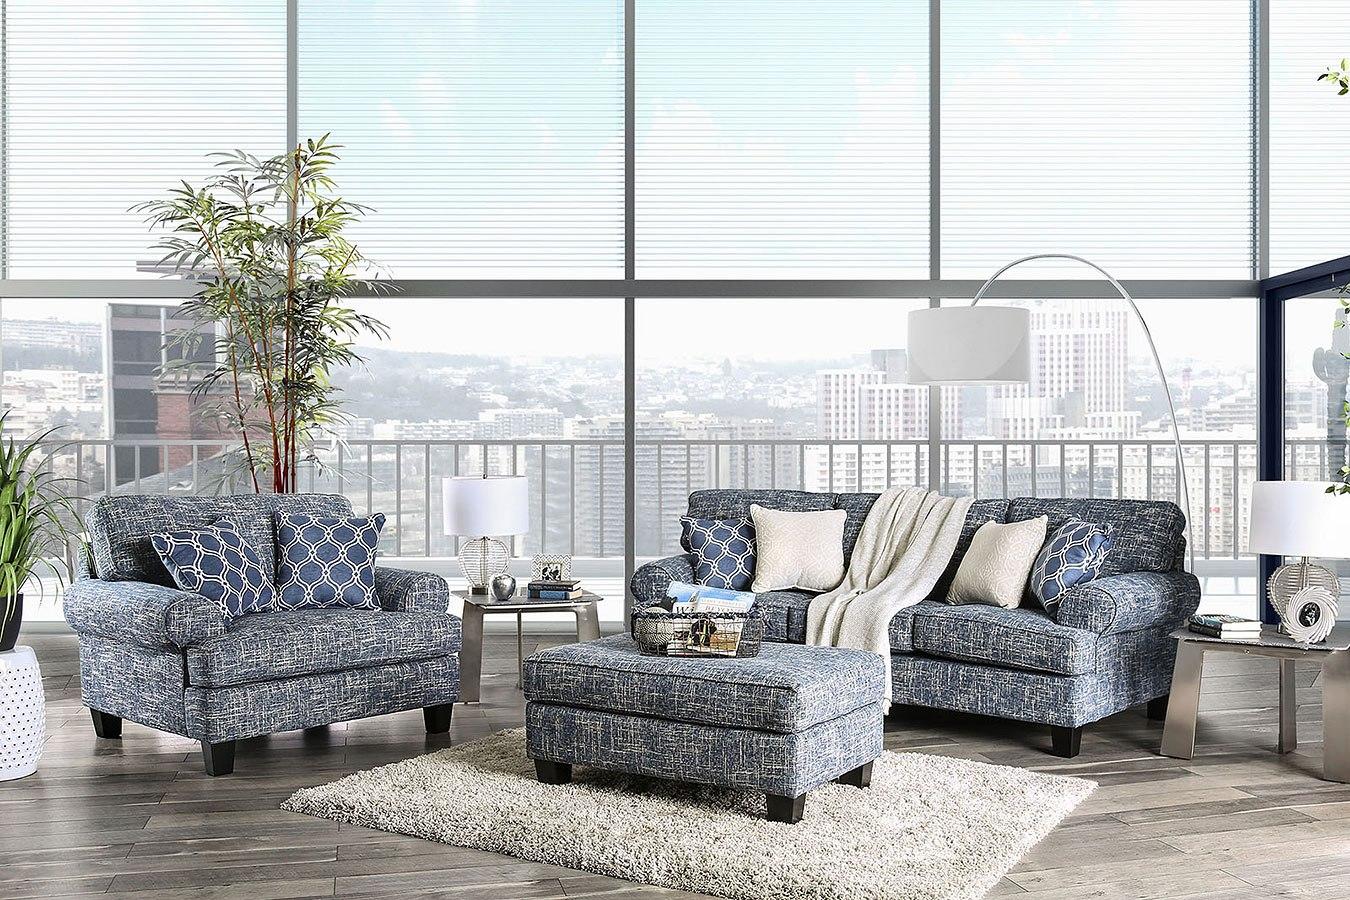 Transitional Sofa and Chair SM8010-2PC Pierpont SM8010-2PC in Blue 